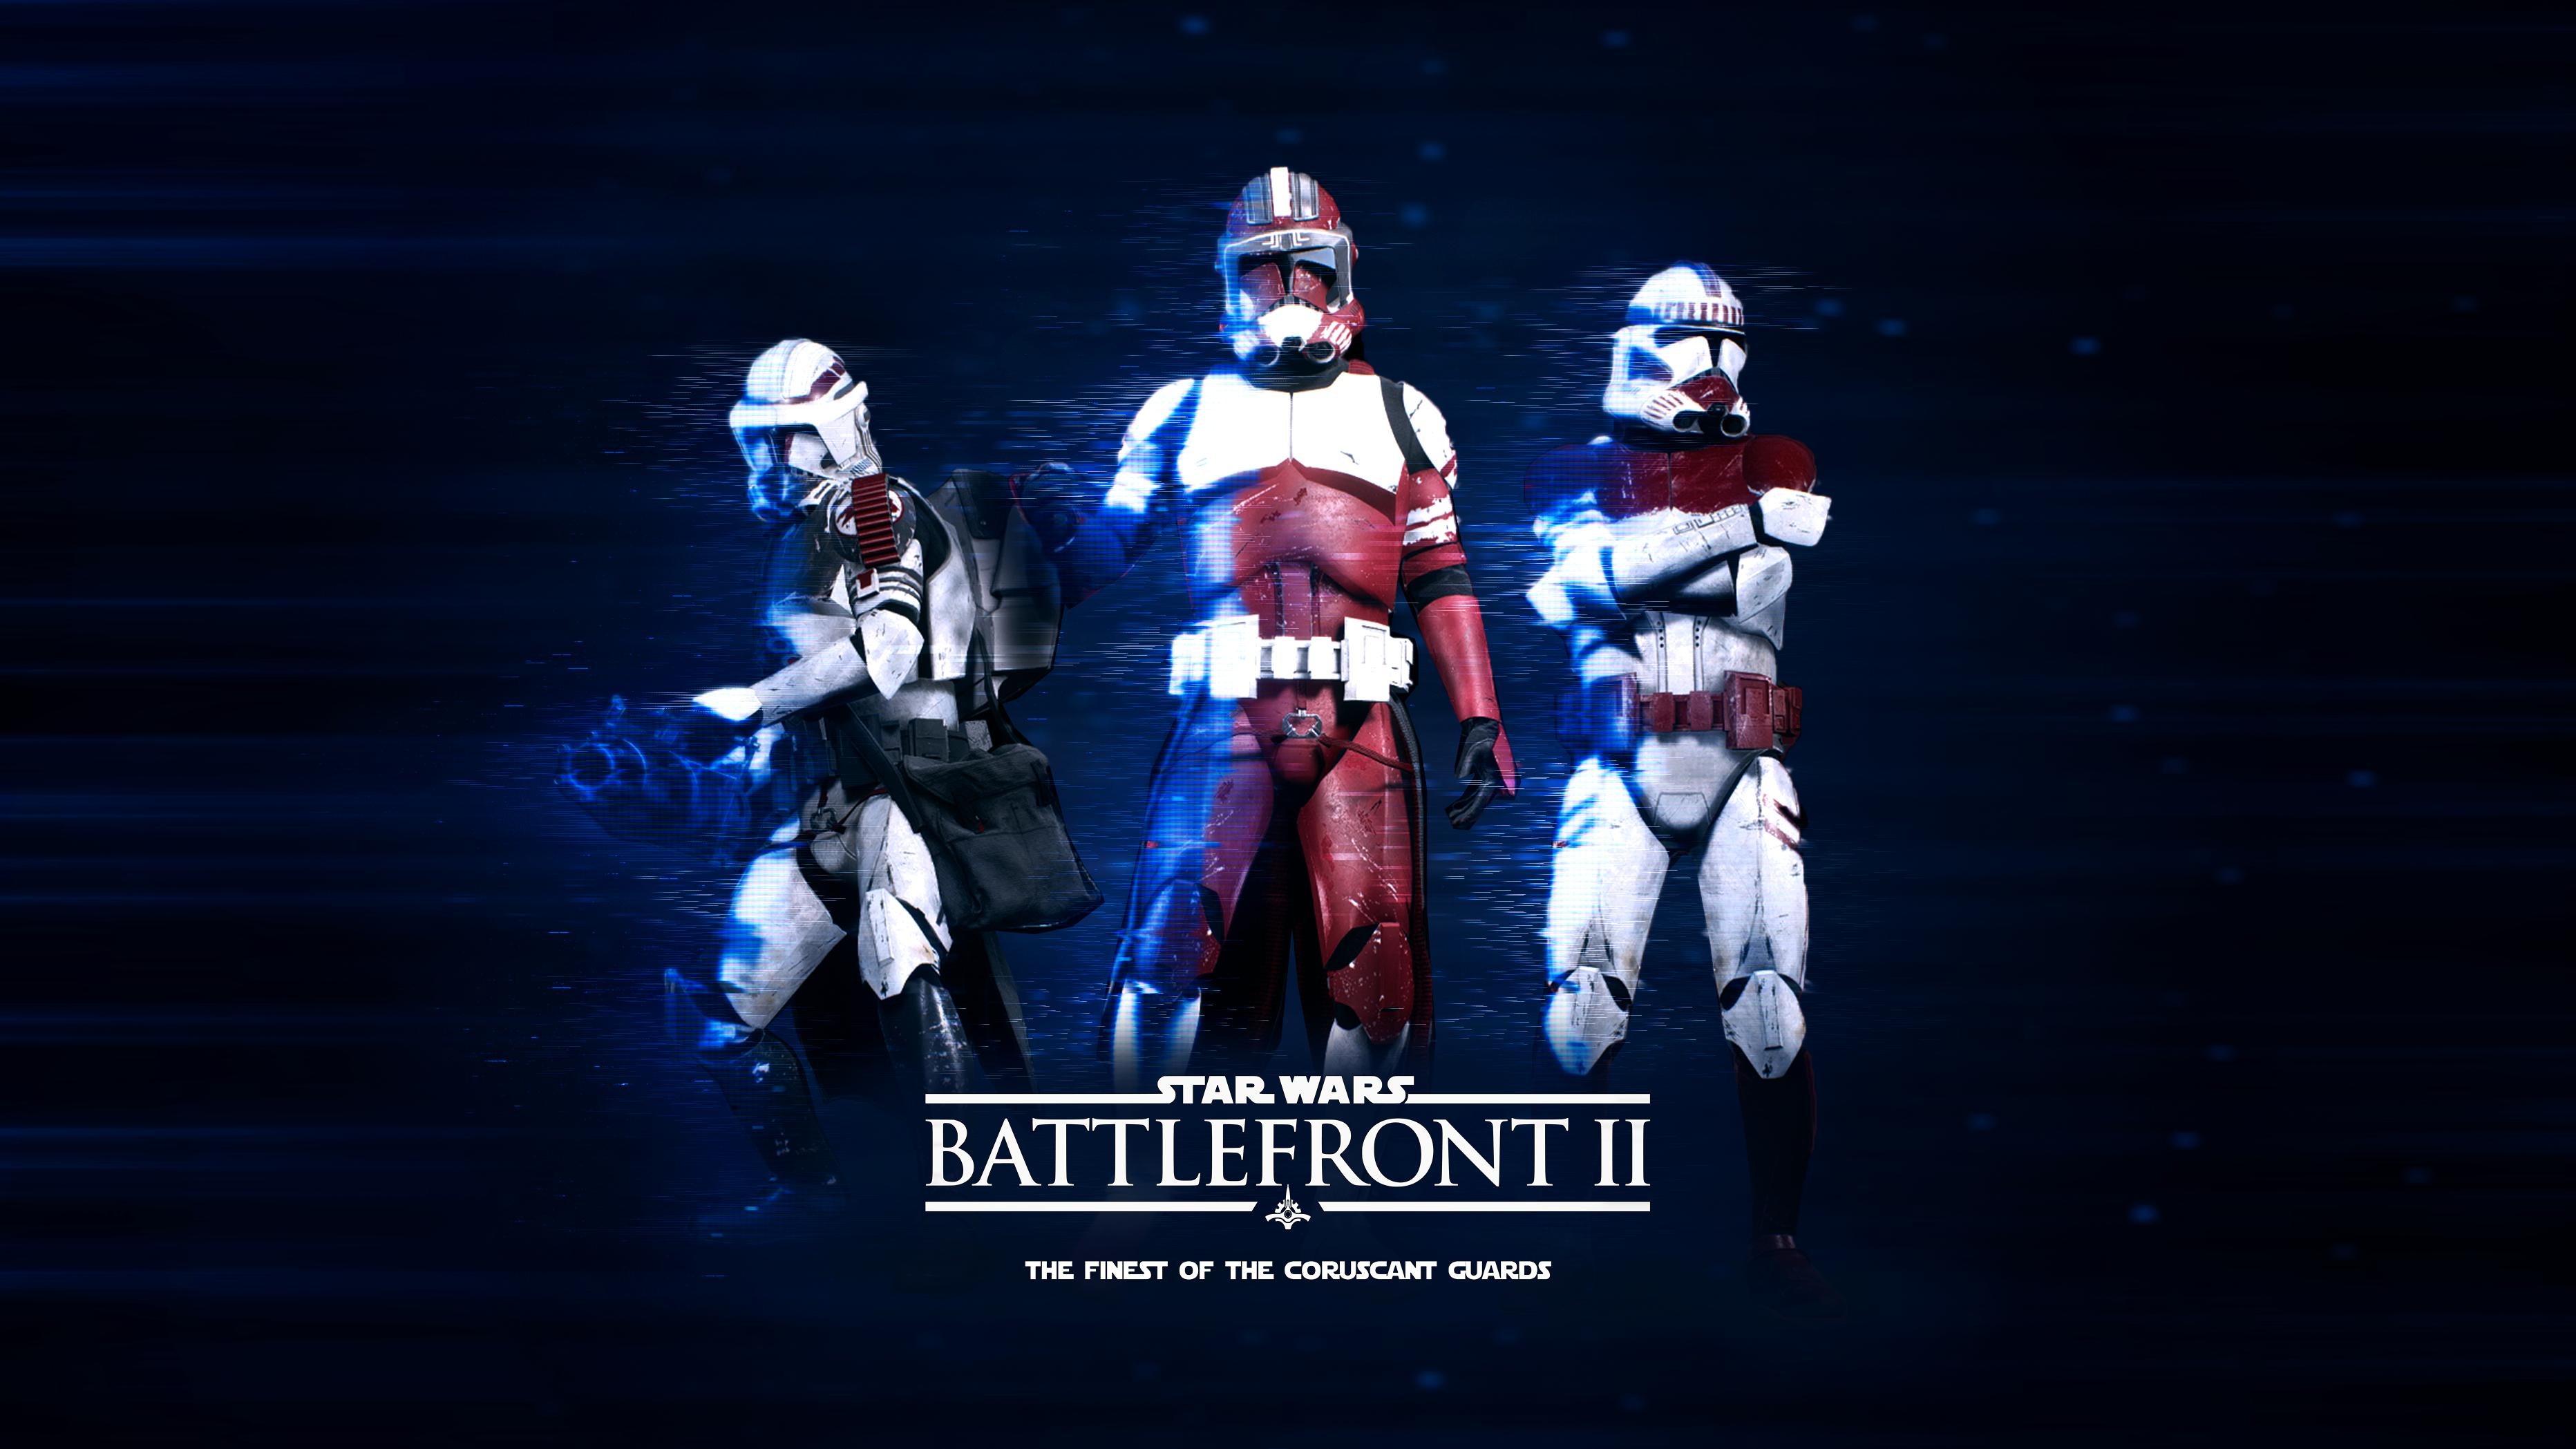 The Finest of the Coruscant Guards at Star Wars: Battlefront II (2017) Nexus and community